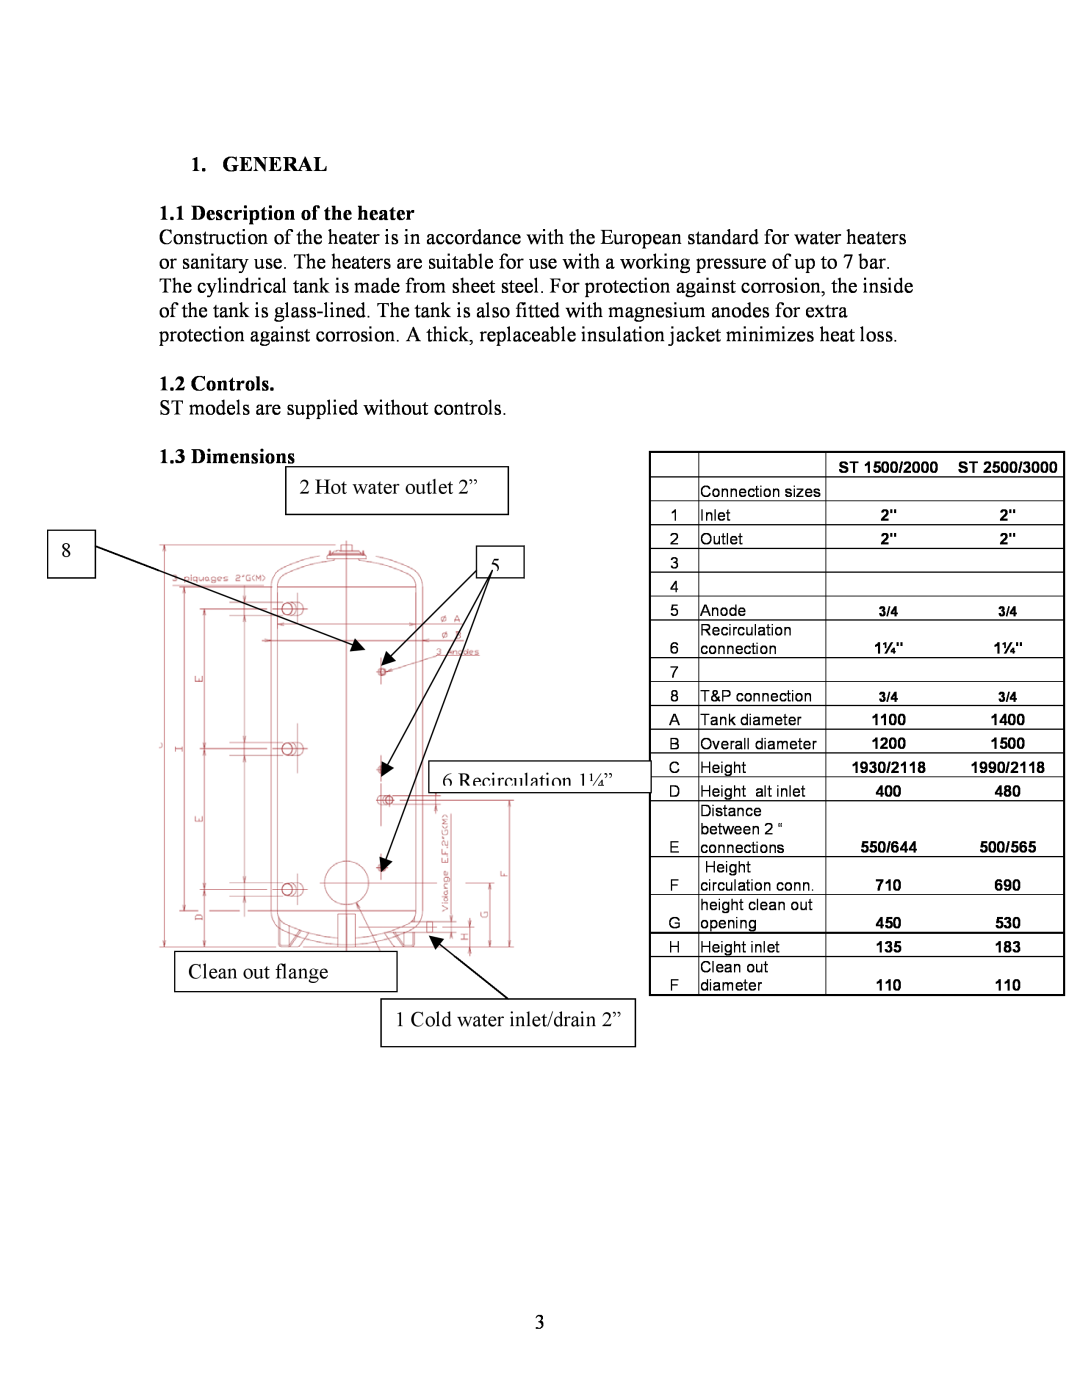 A.O. Smith ST 1500, ST 3000 installation instructions GENERAL 1.1Description of the heater, Controls, Dimensions 